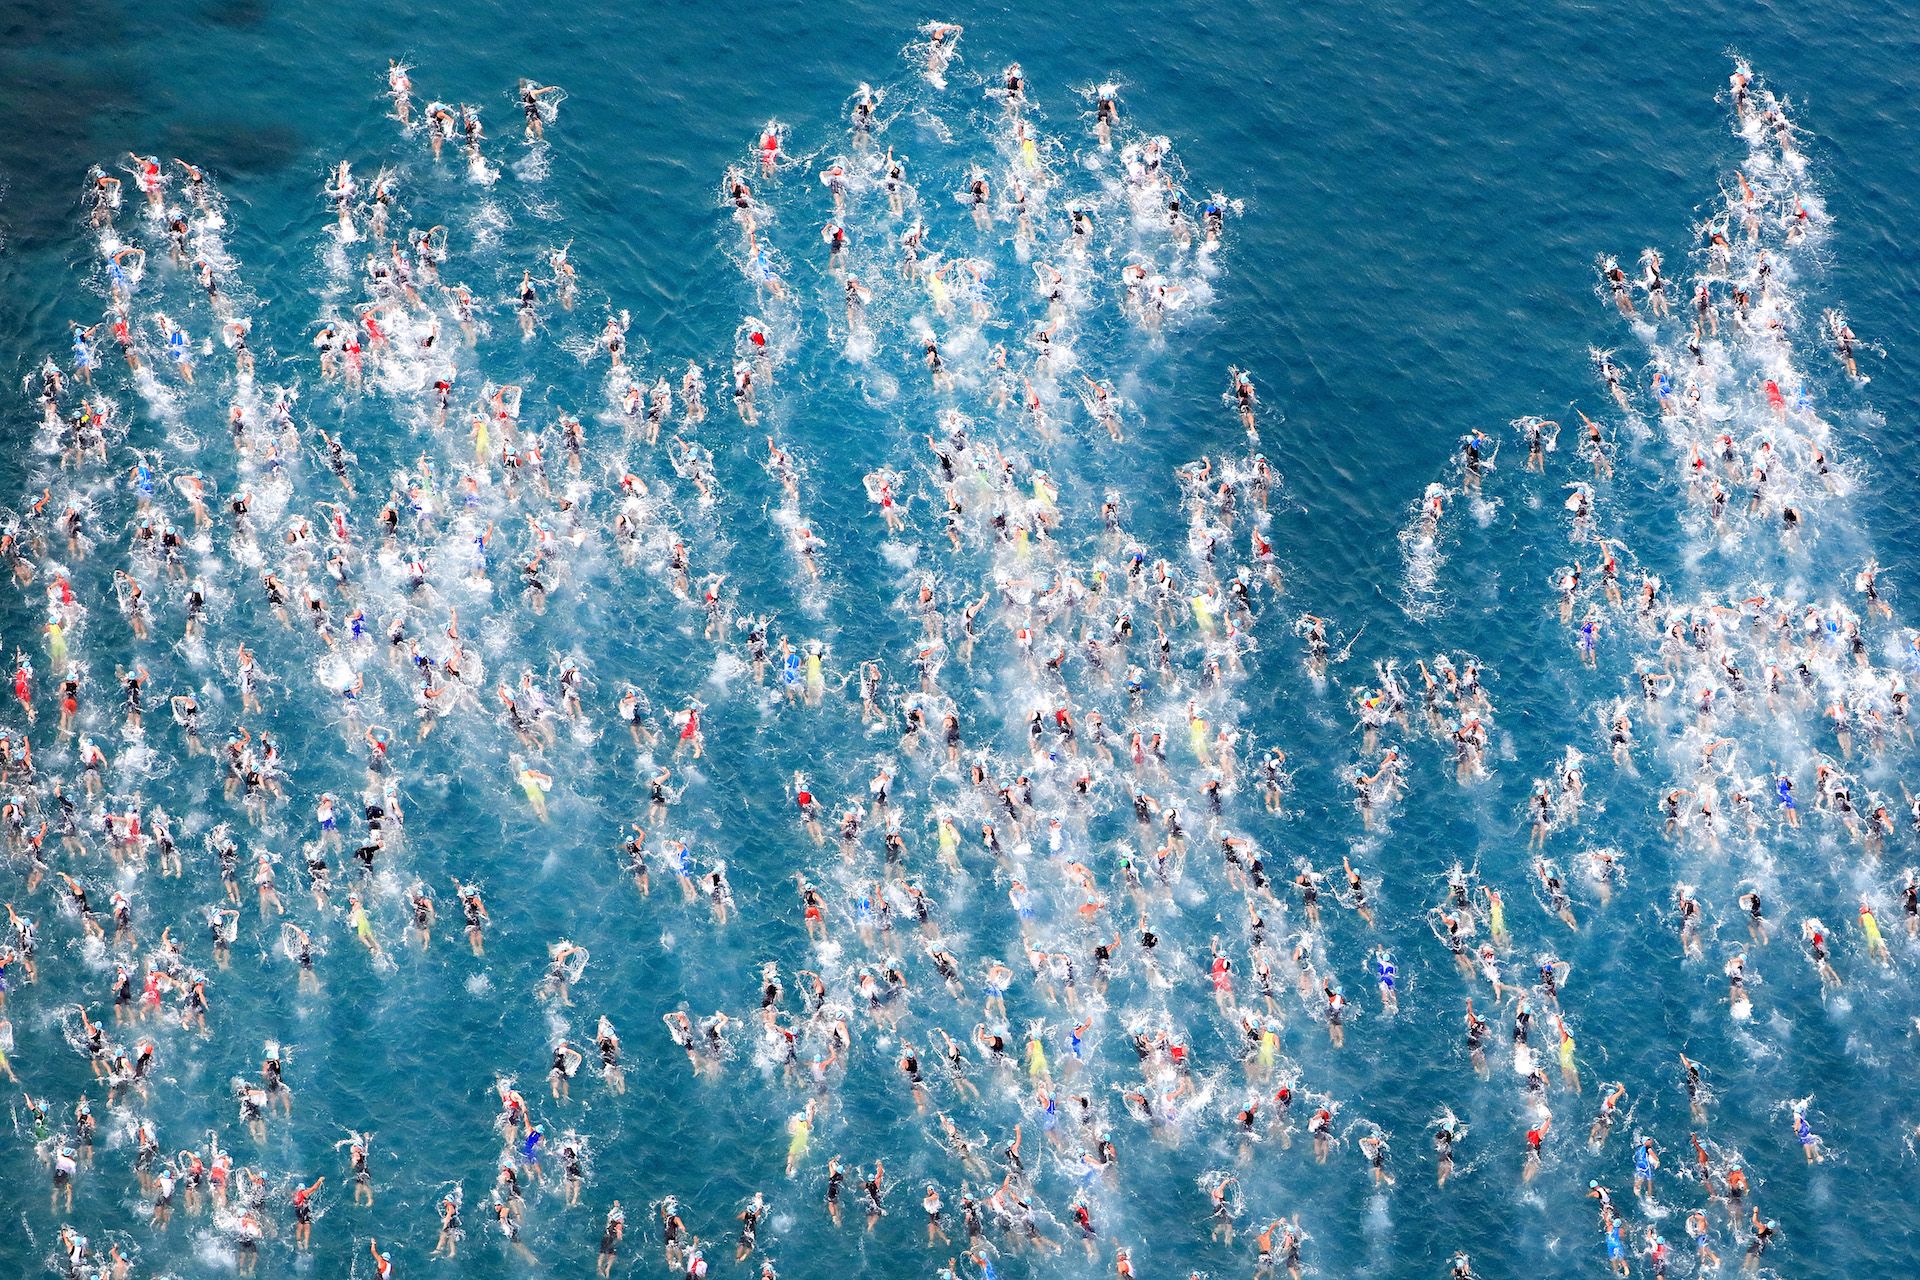 Photo by Tom Pennington/Getty Images for Ironman